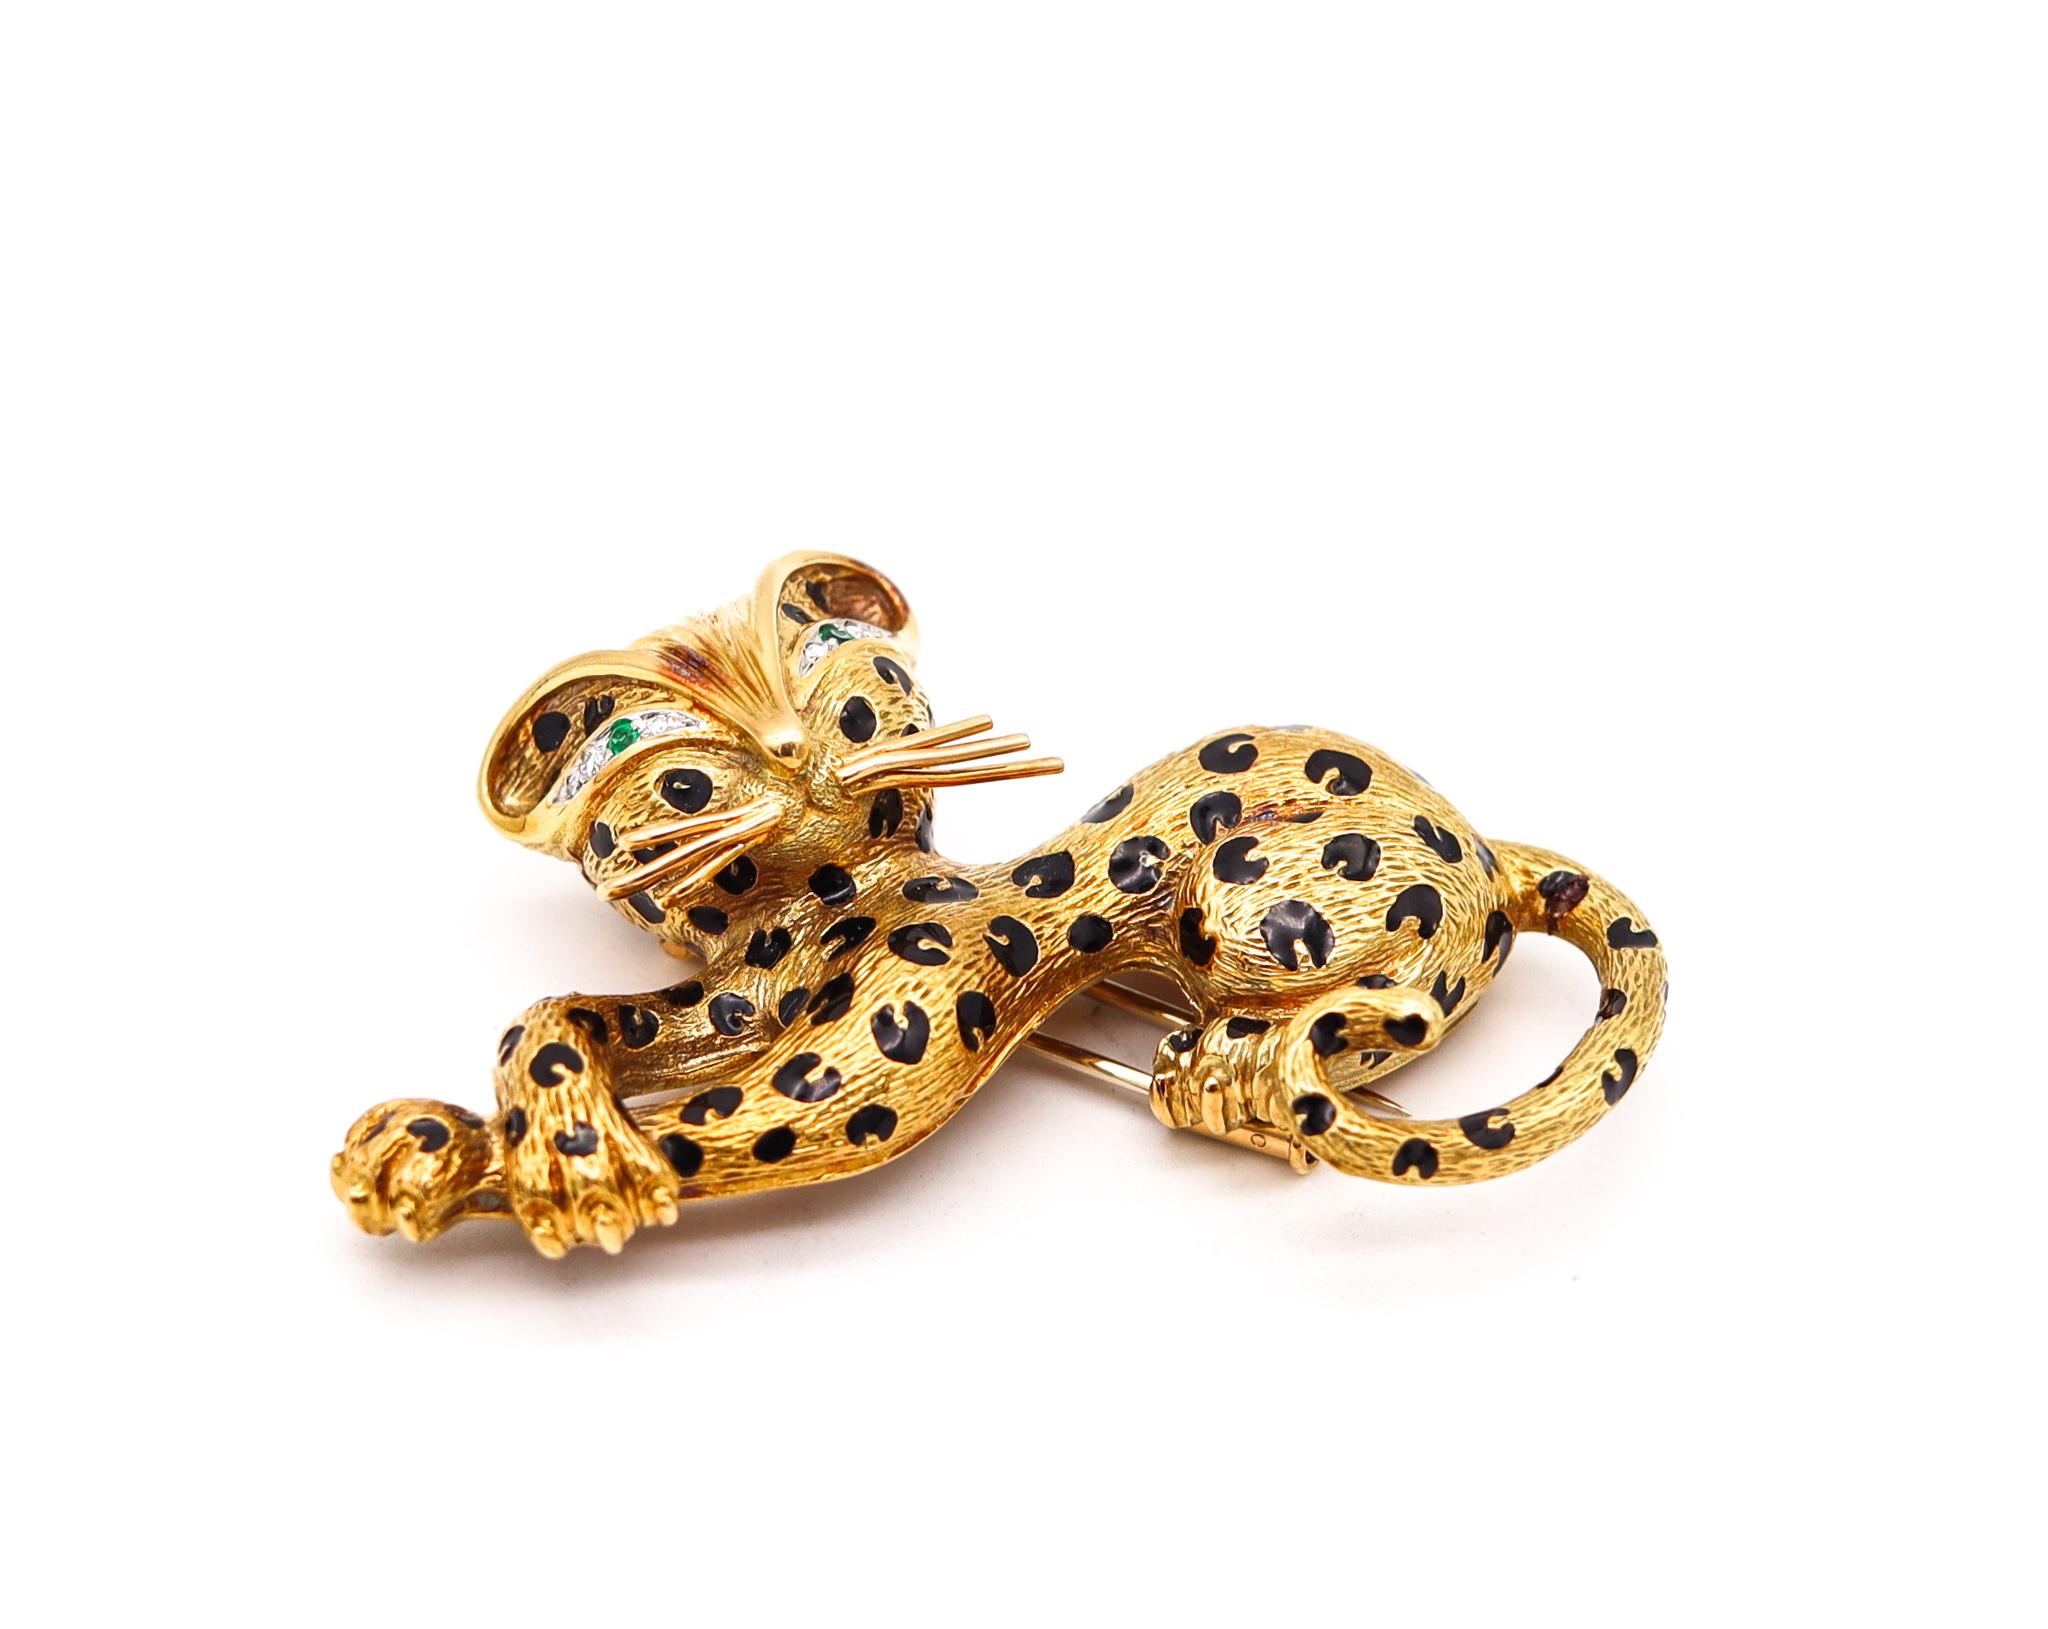 Brooch designed by Fred of Paris.

This brooch is one of the most iconic designs by the jewelry house of Fred Of Paris. Created in Paris France back in the 1970 and crafted in the shape of a sauvage cat in solid yellow gold of 18 karats with